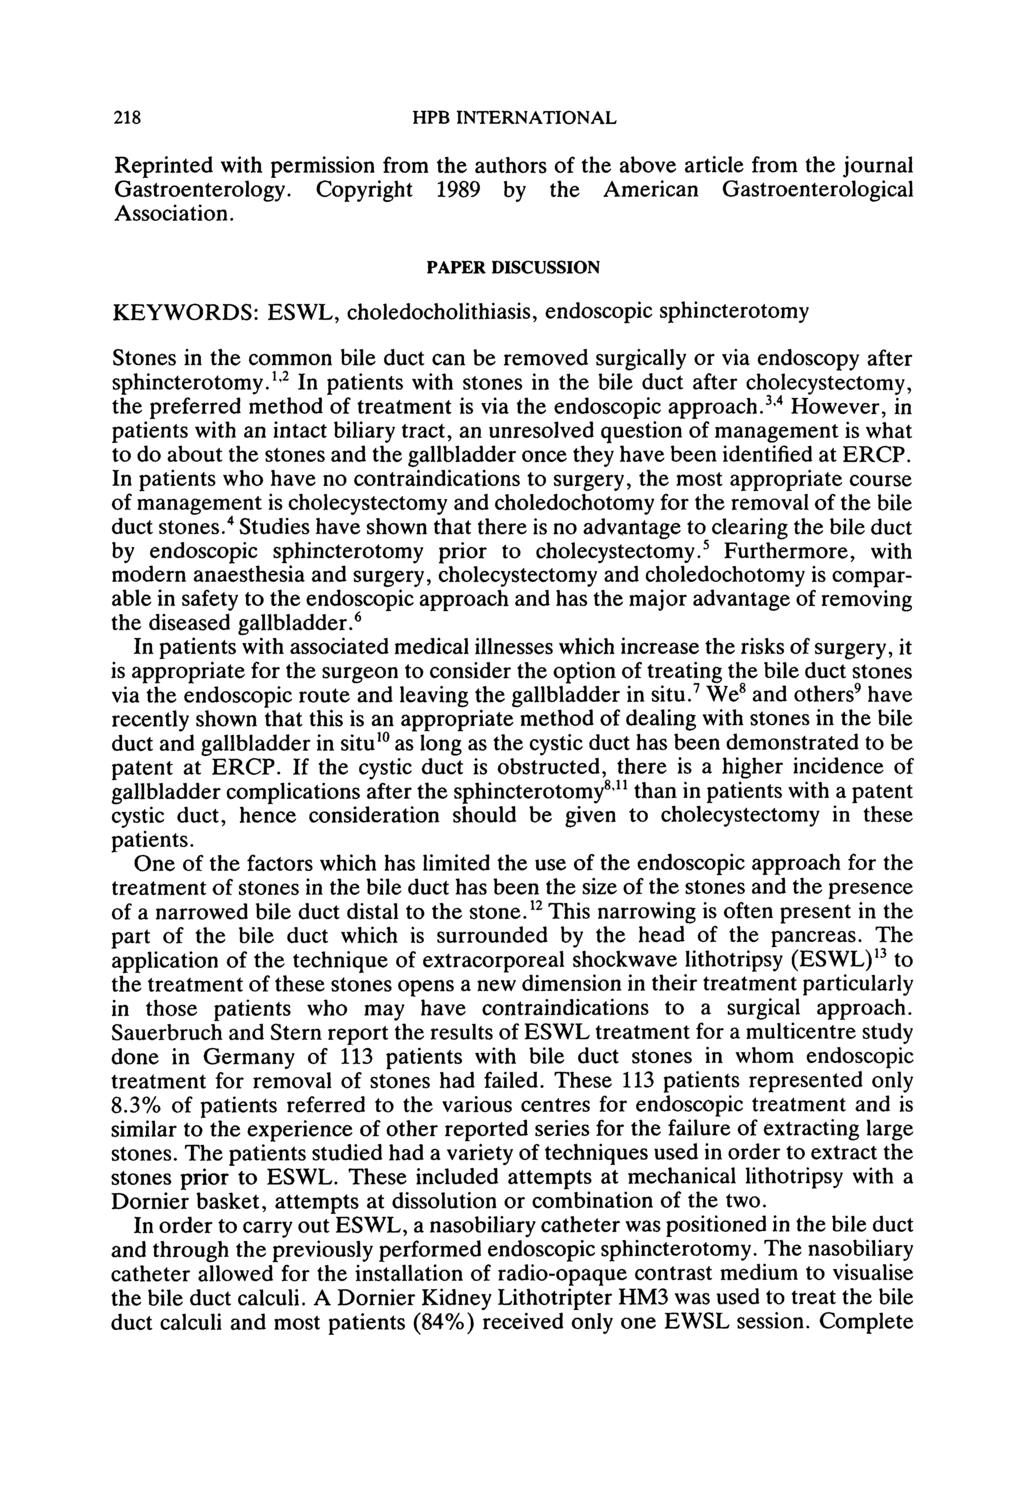 218 HPB INTERNATIONAL Reprinted with permission from the authors of the above article from the journal Gastroenterology. Copyright 1989 by the American Gastroenterological Association.